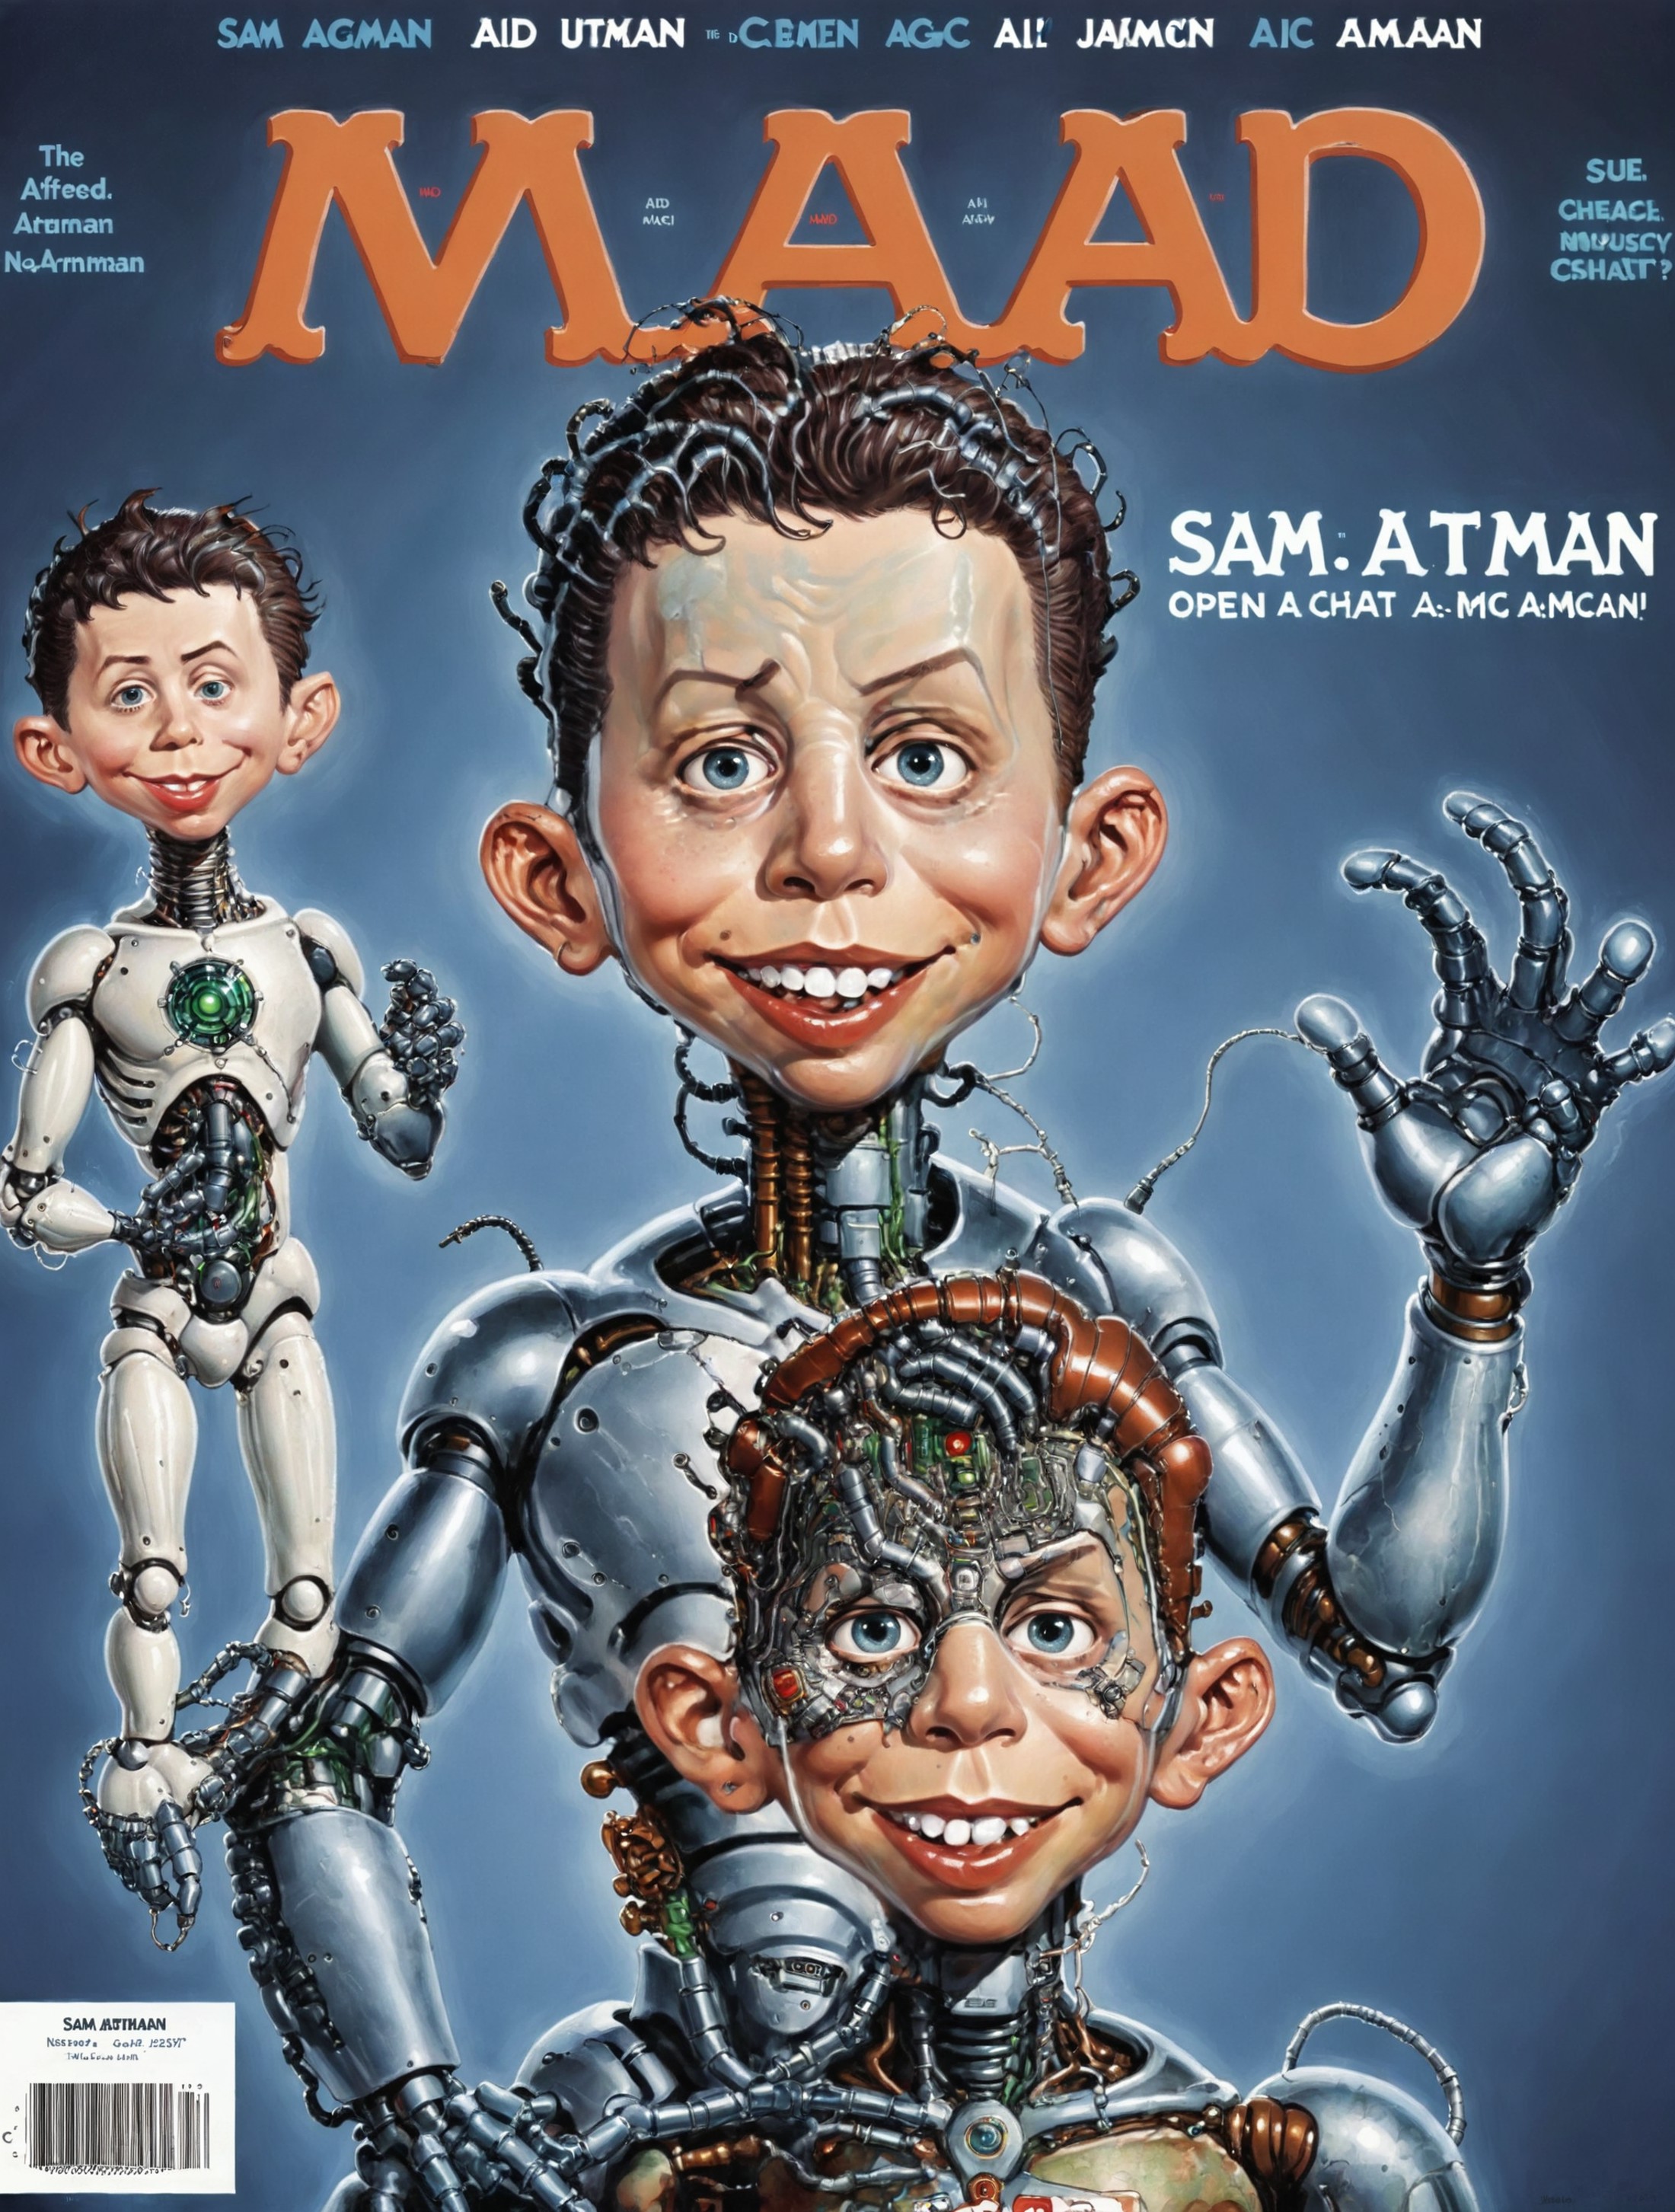 ohwx man as alfred e neuman cyborg, mad-magazine-cover, and the words "Sam Altman open AI chat gpt" along the top <lora:al...